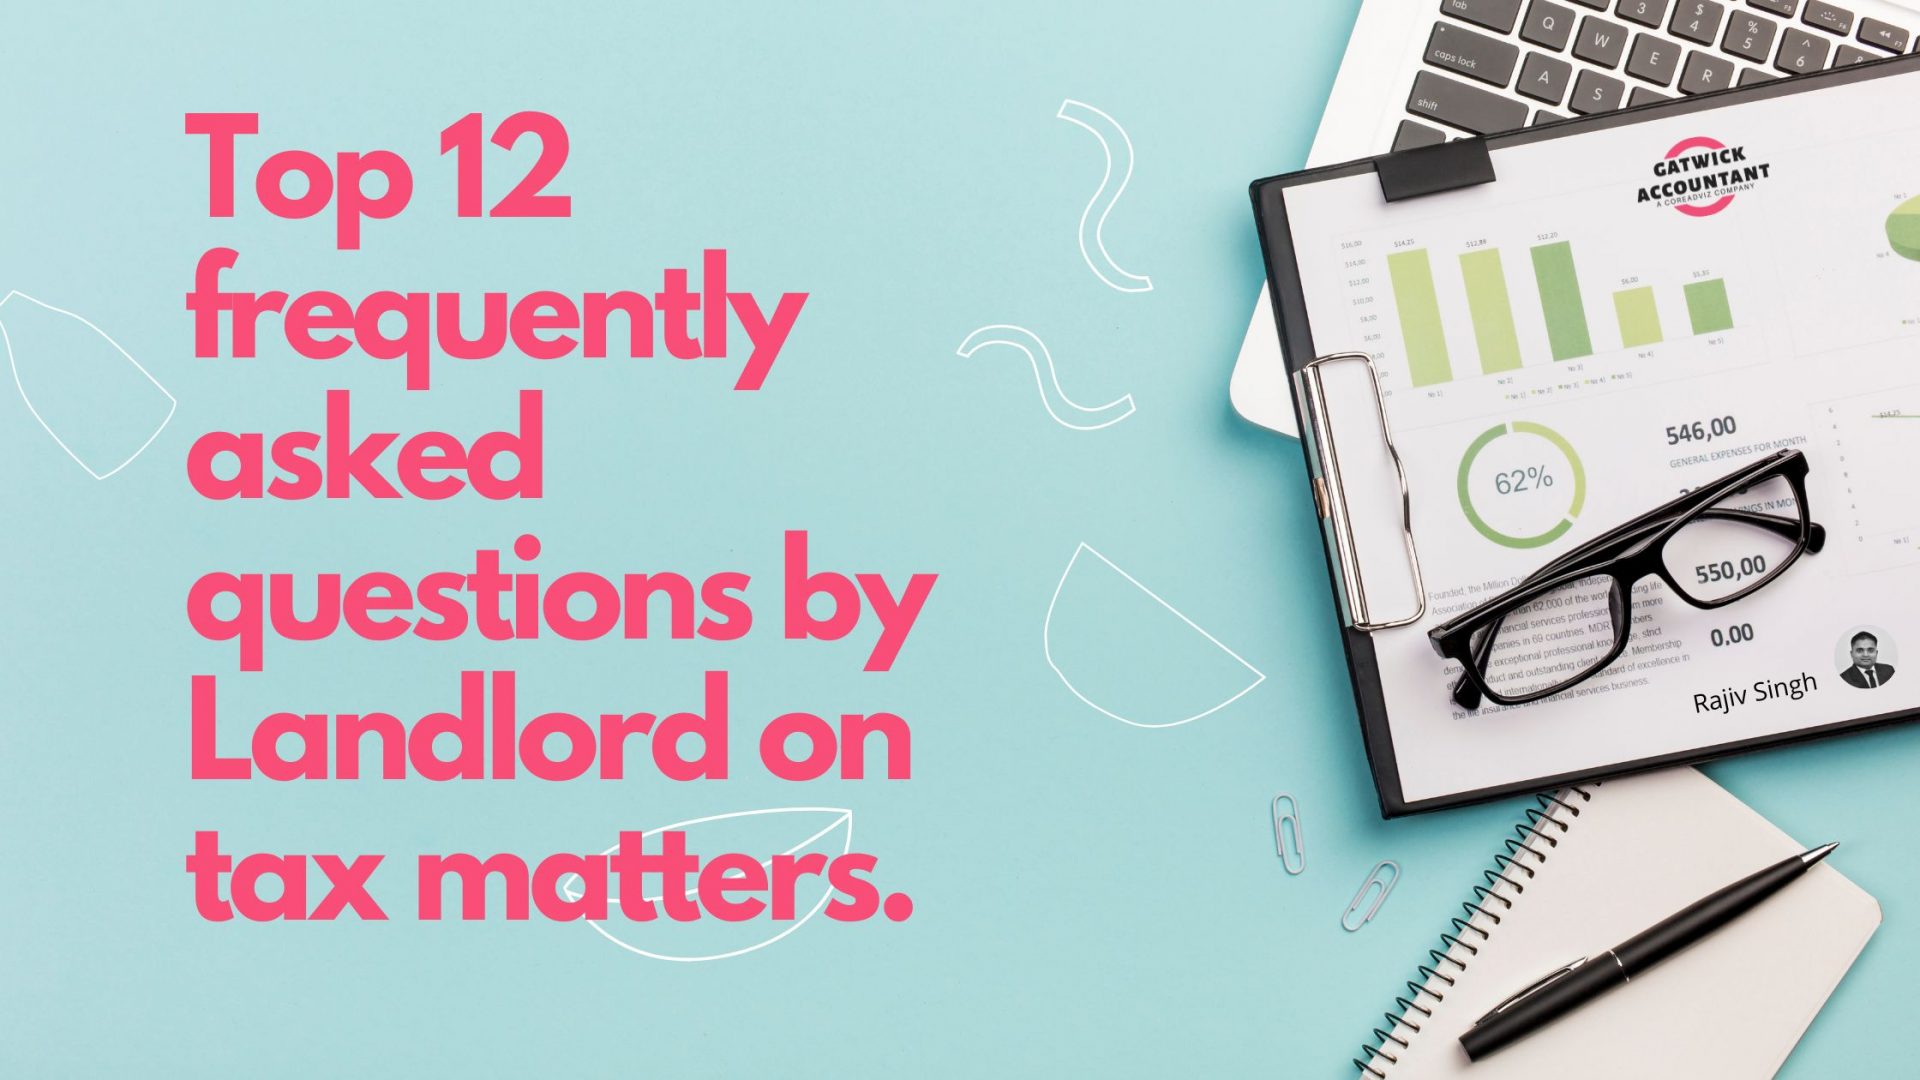 An interview with Landlords accountant for most FAQs on taxation